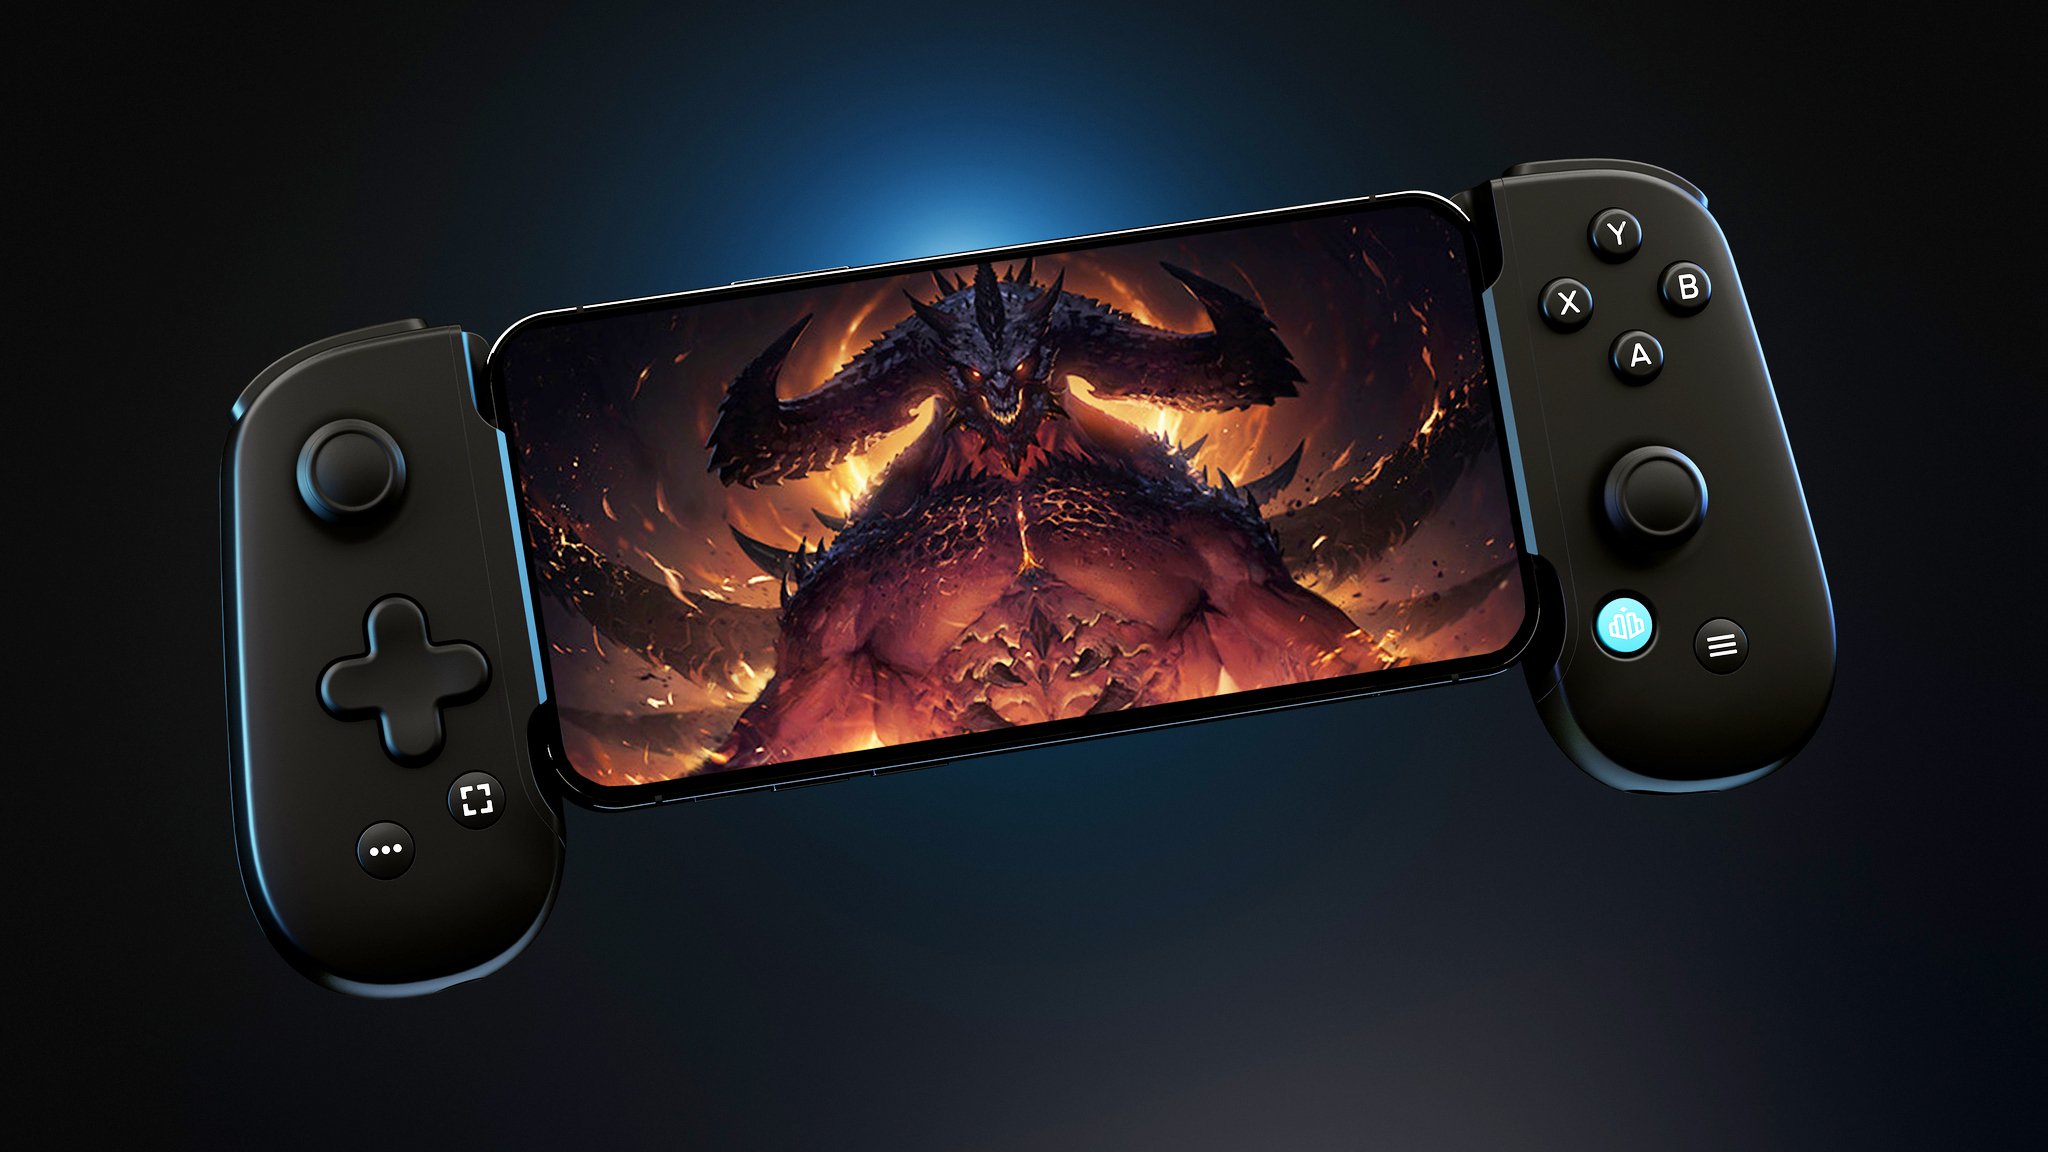 Diablo Immortal: The Best Control Options In the Game